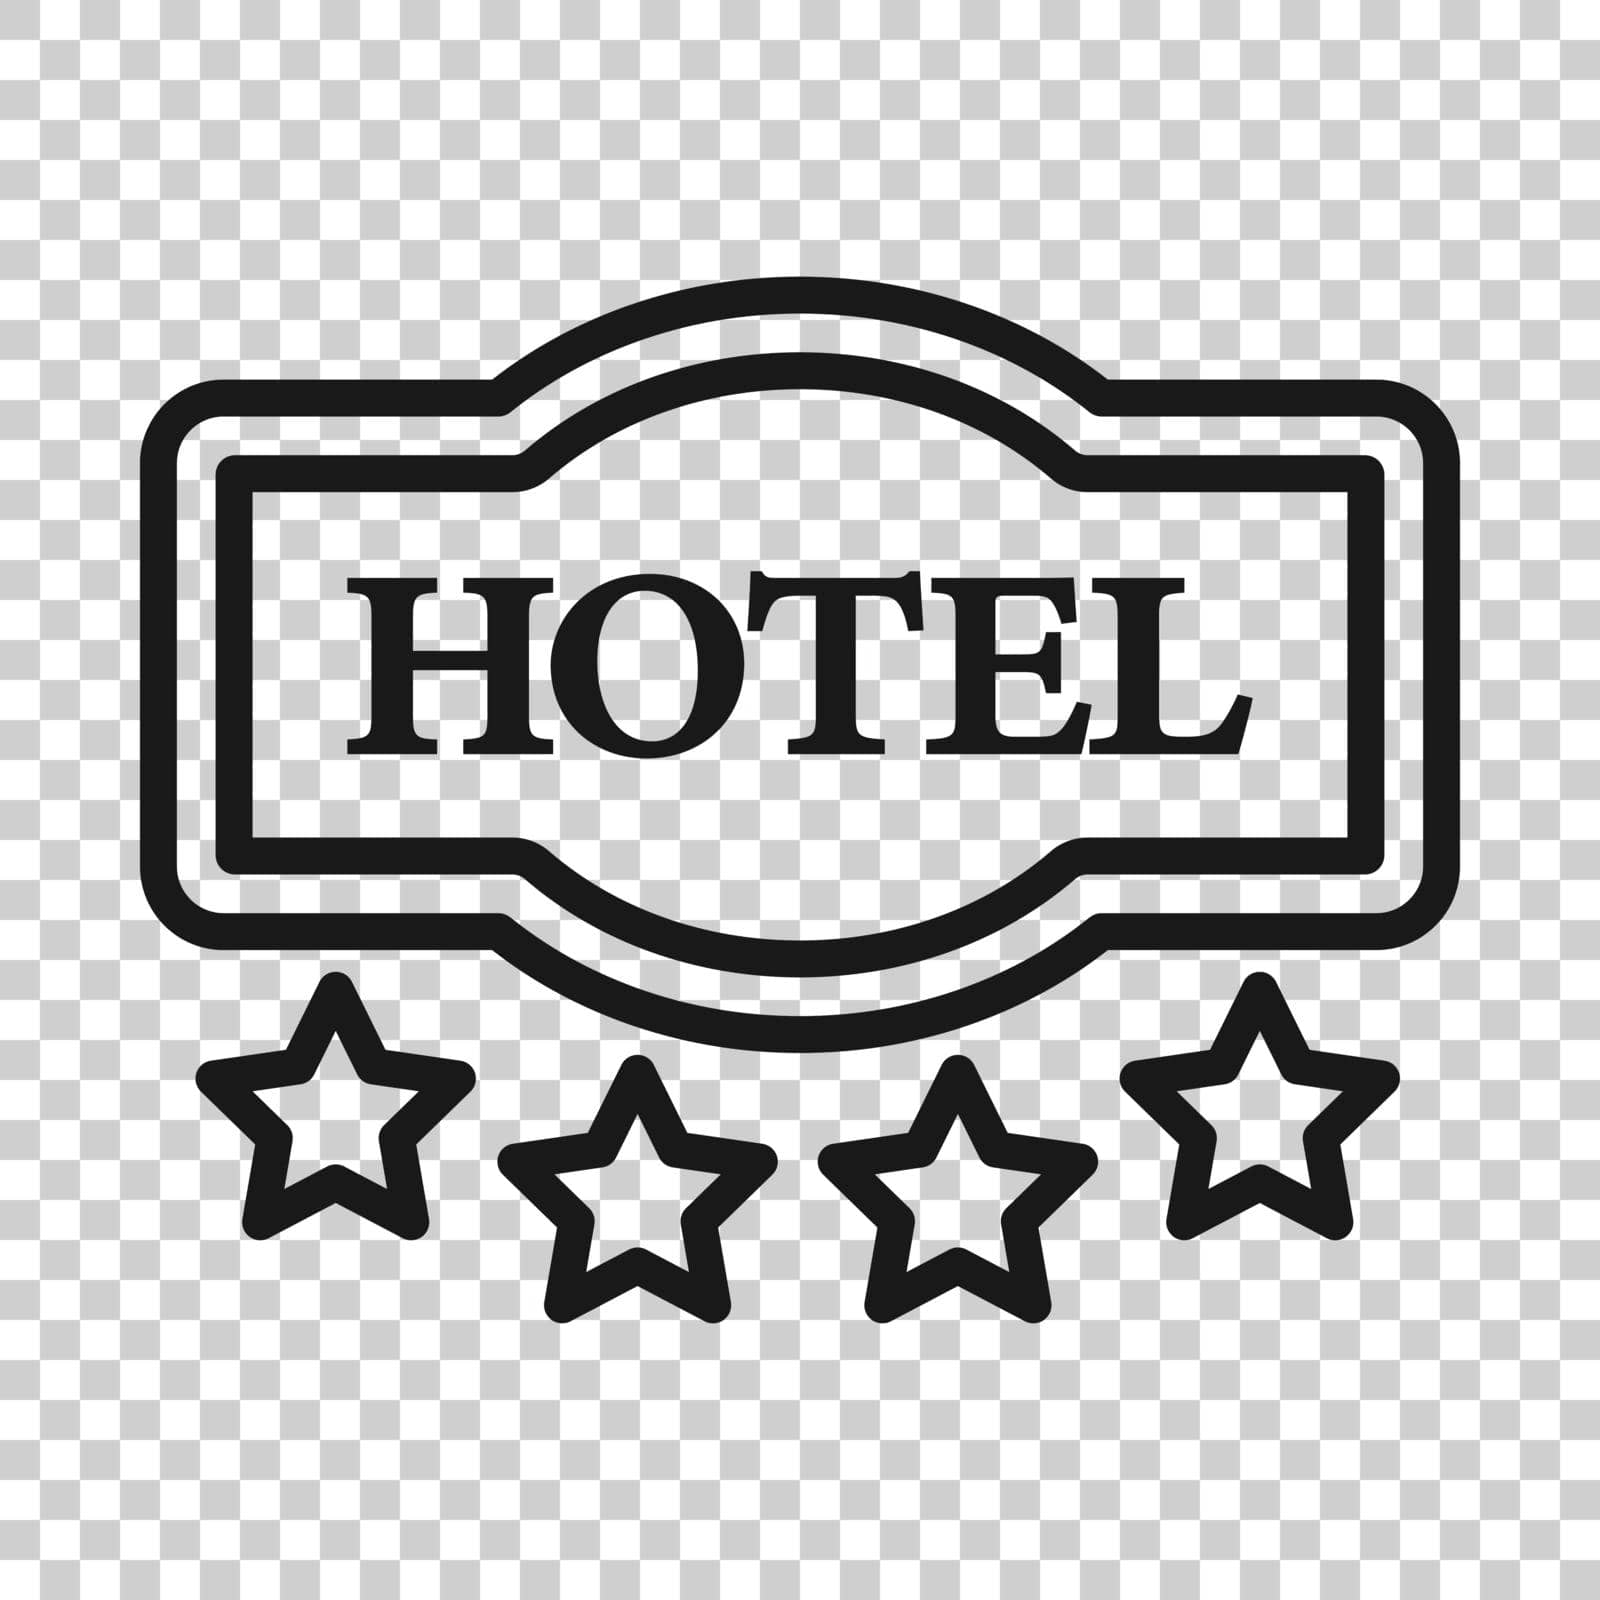 Hotel 4 stars sign icon in flat style. Inn vector illustration on white isolated background. Hostel room information business concept. by LysenkoA